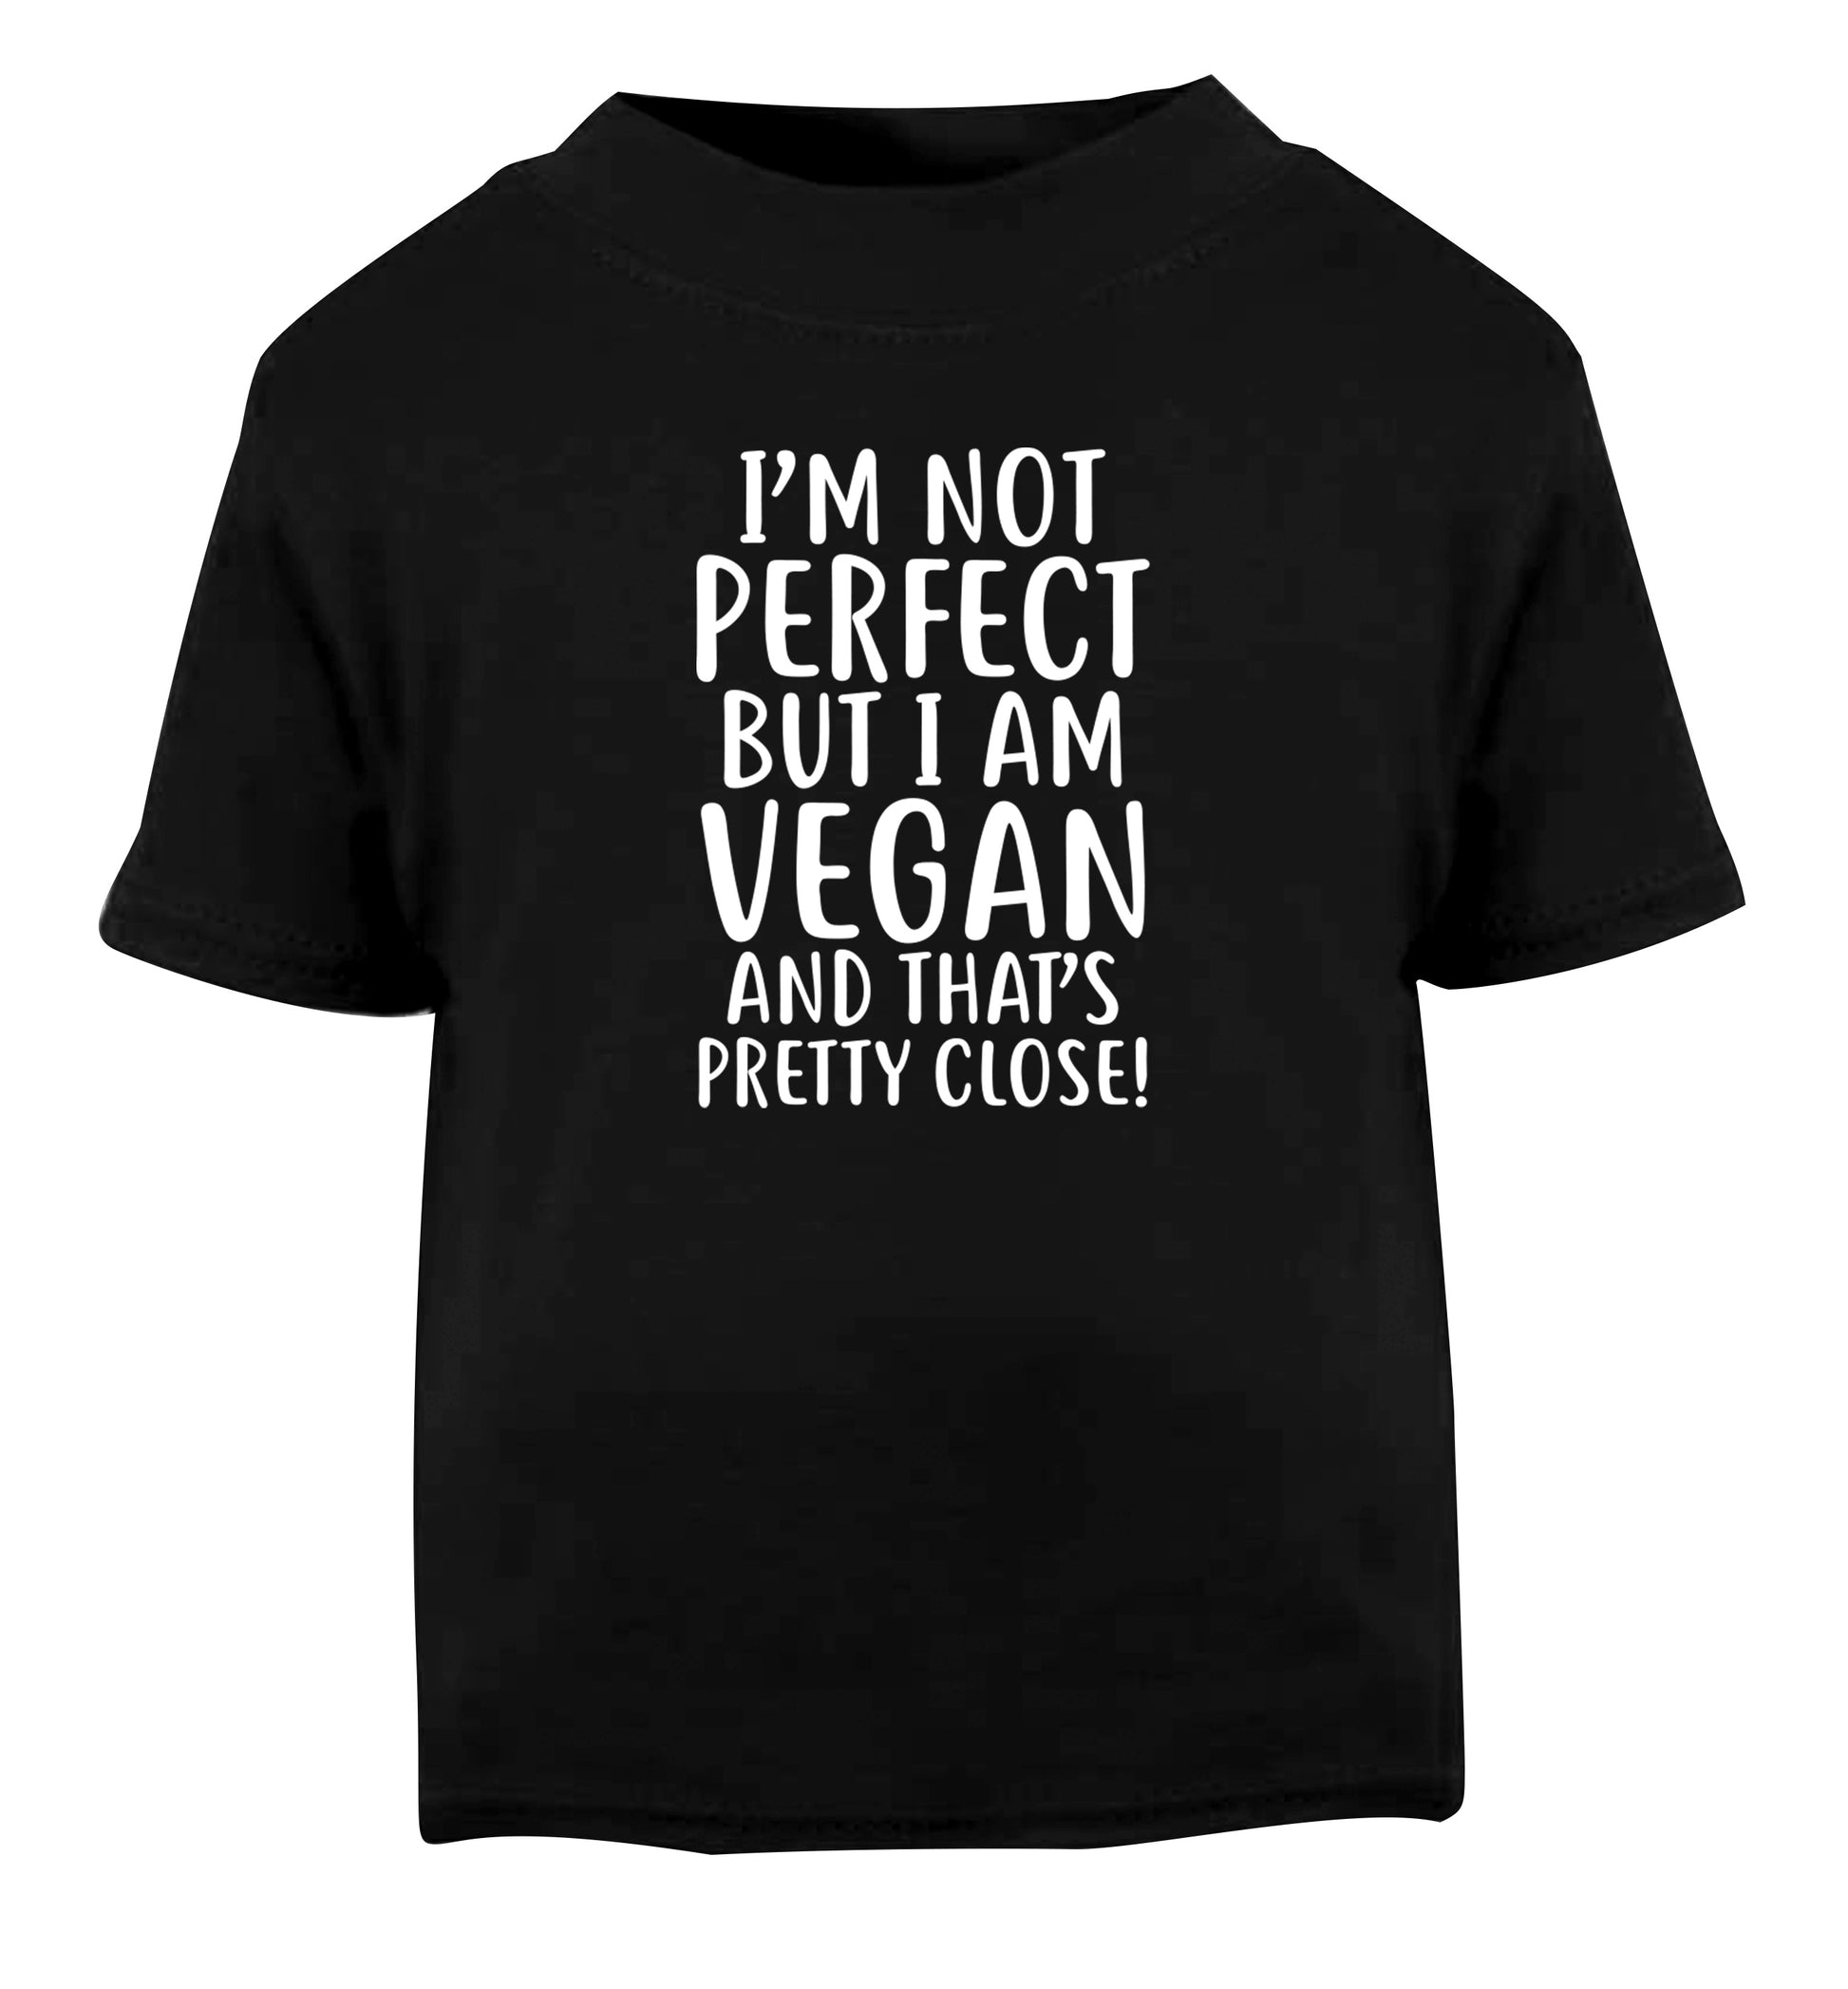 Might not be perfect but I am vegan Black Baby Toddler Tshirt 2 years